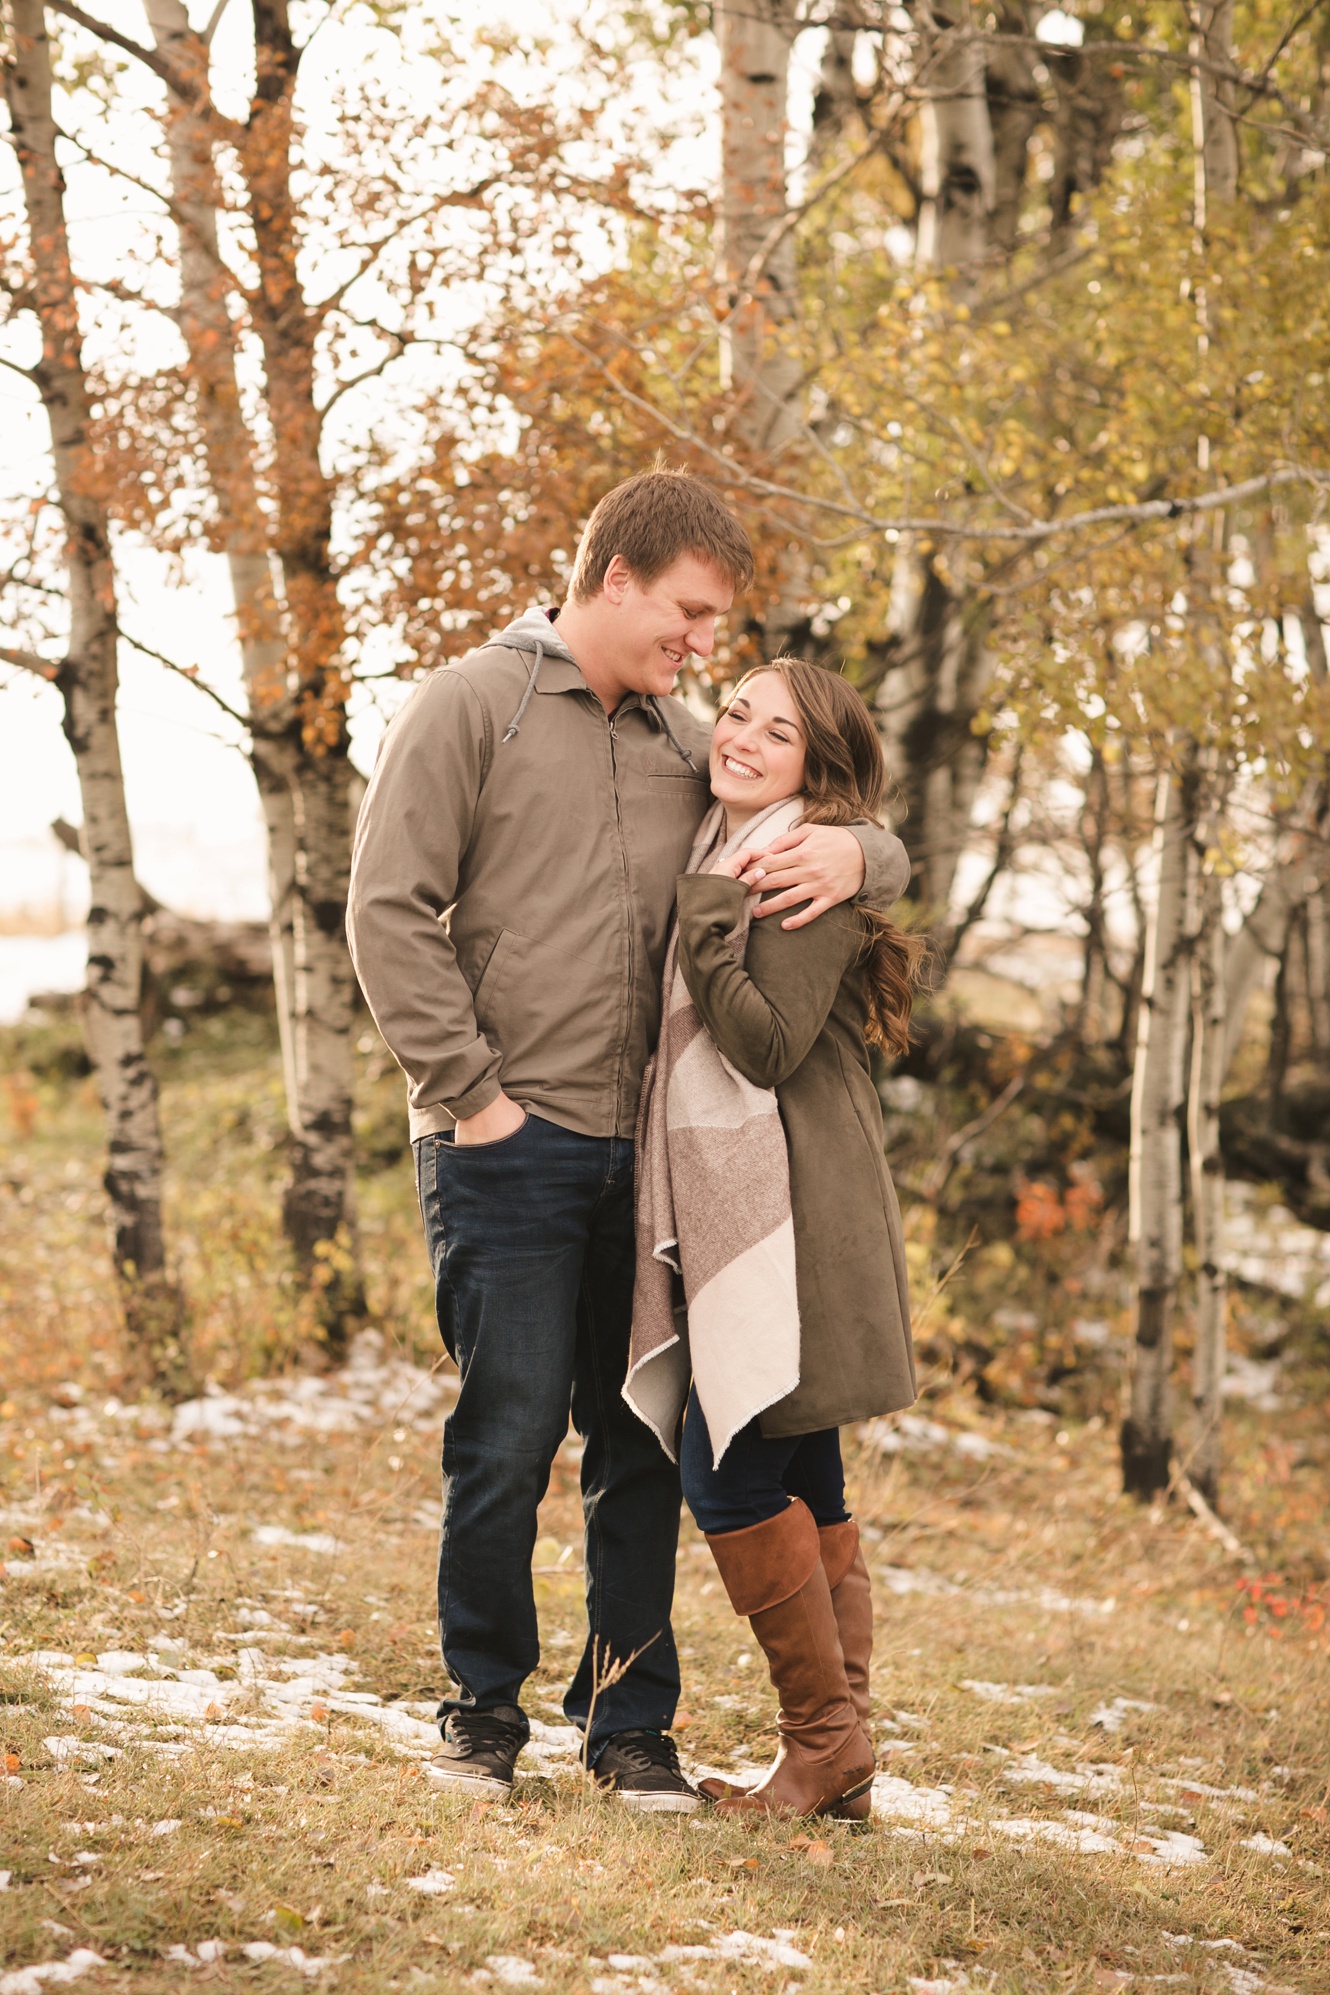 Romantic Fall Engagement Session photo